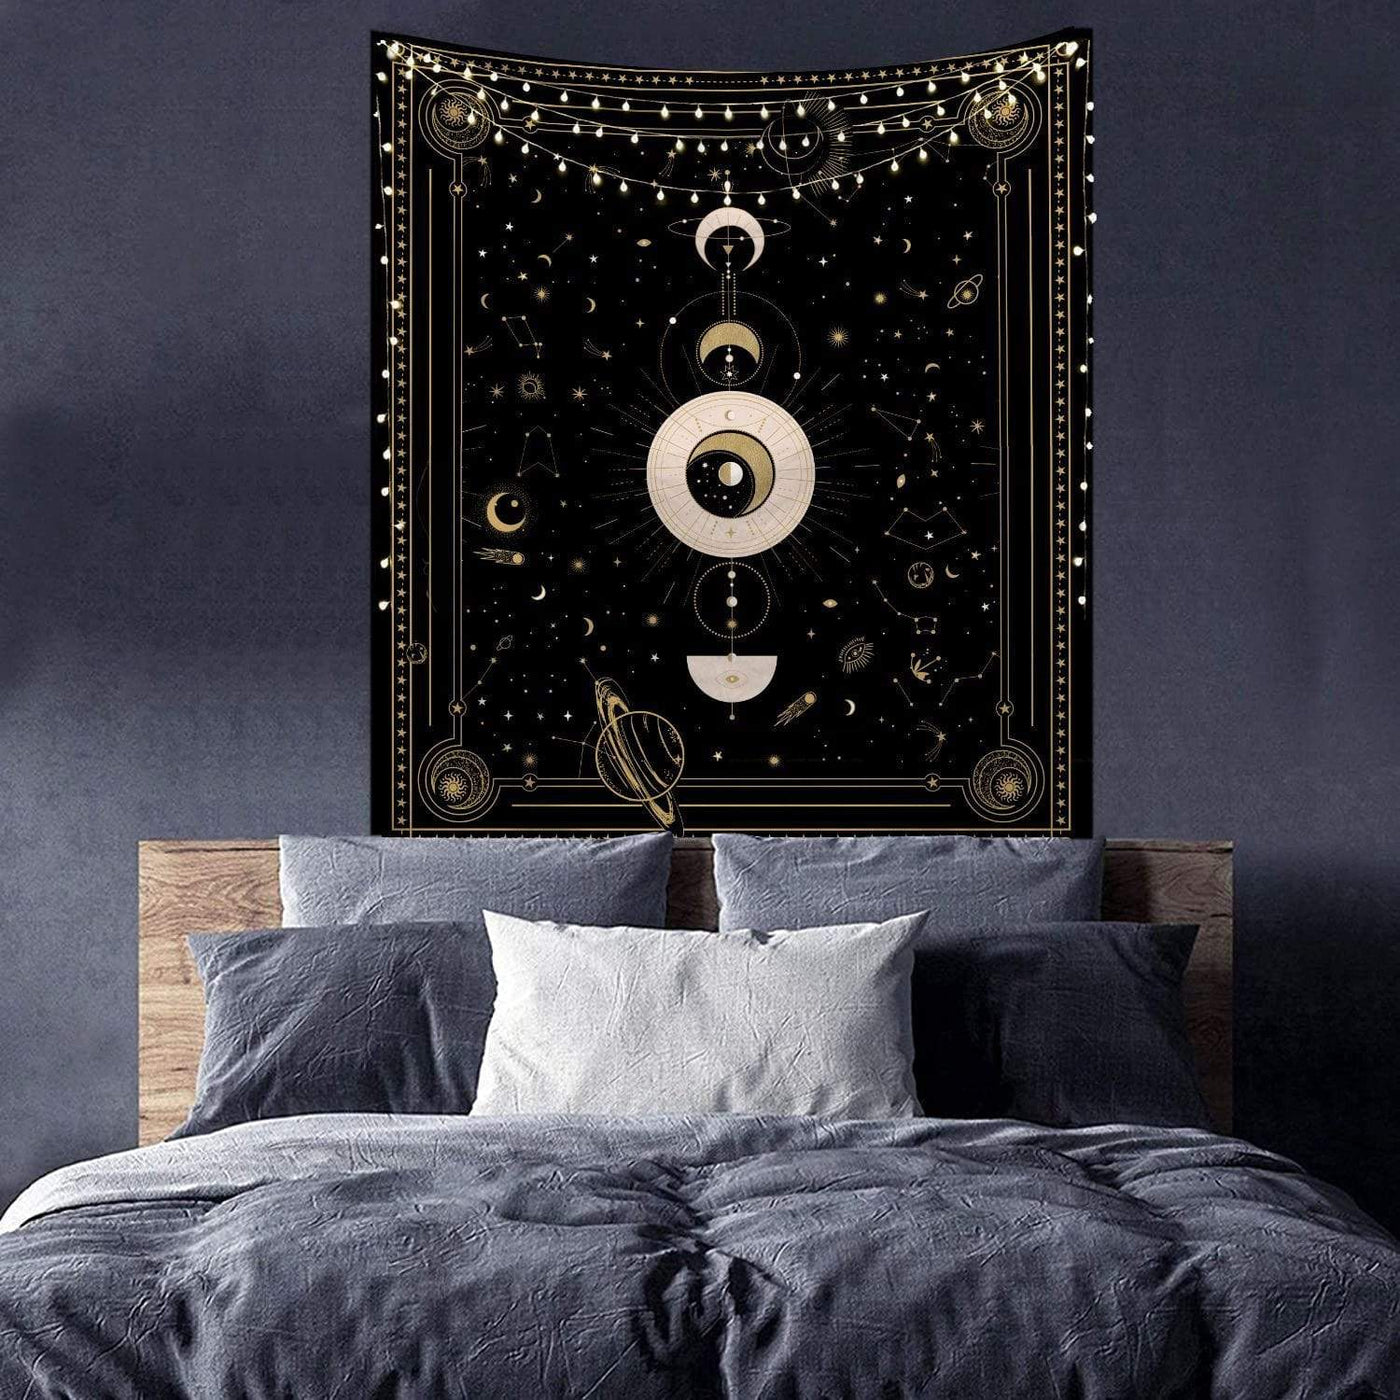 WickedAF Black / 180x230cm/70.9"x90.5" Astrology Design Wall Tapestry (2 colors)